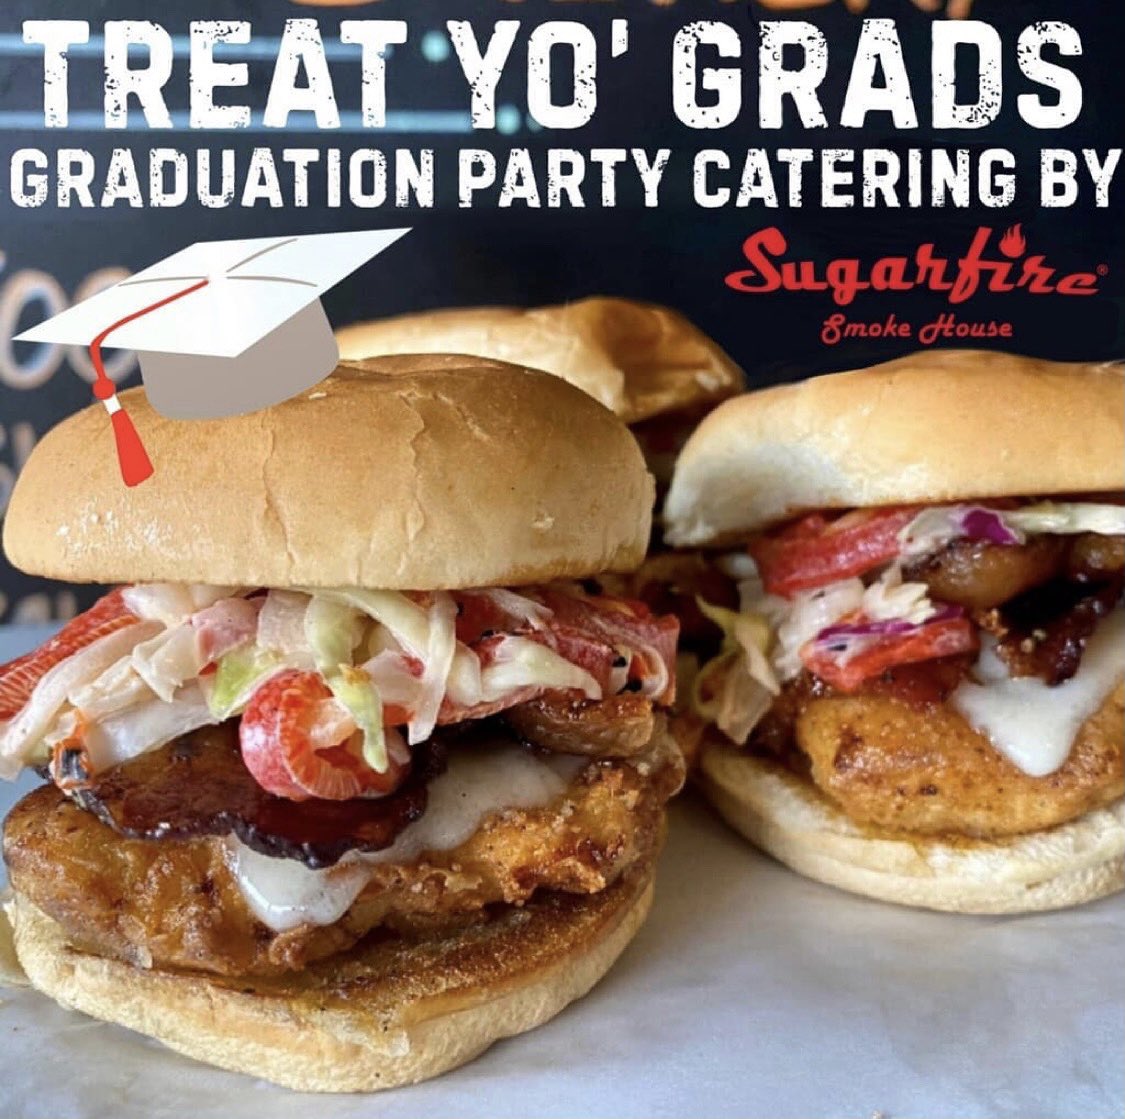 If you could have us provide CATERING ON THE HOUSE to someone hosting a #GraduationParty soon, who would it be?